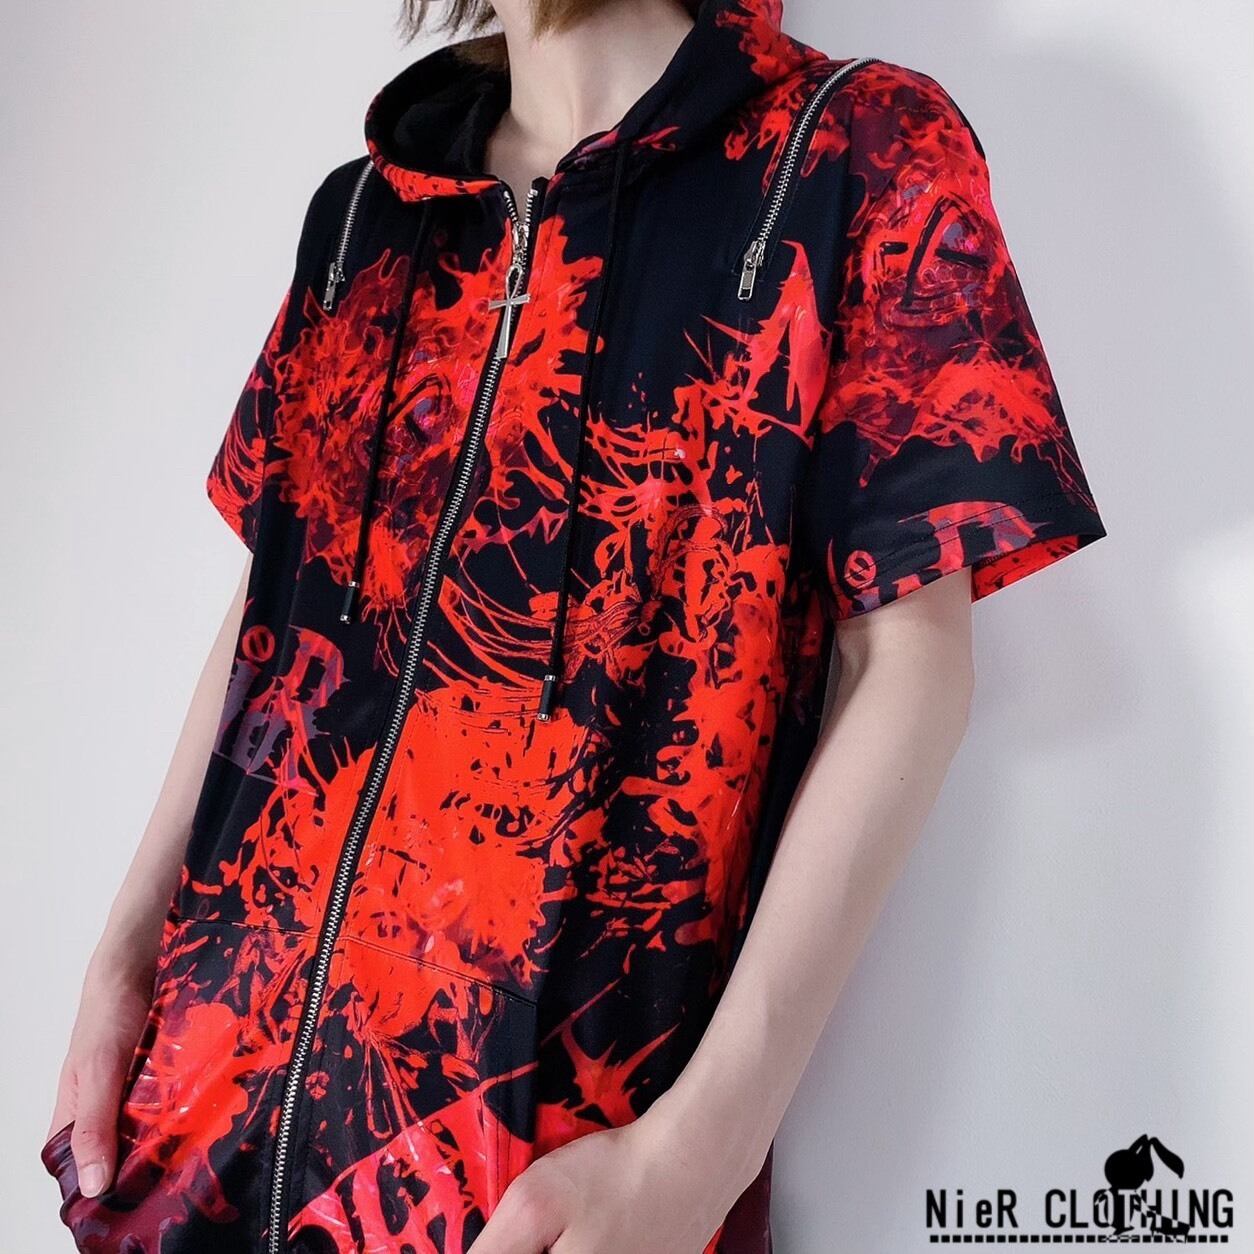 2WAY OFF-Shoulder半袖ZIP PARKA【彼岸花】 | NIER CLOTHING powered by BASE